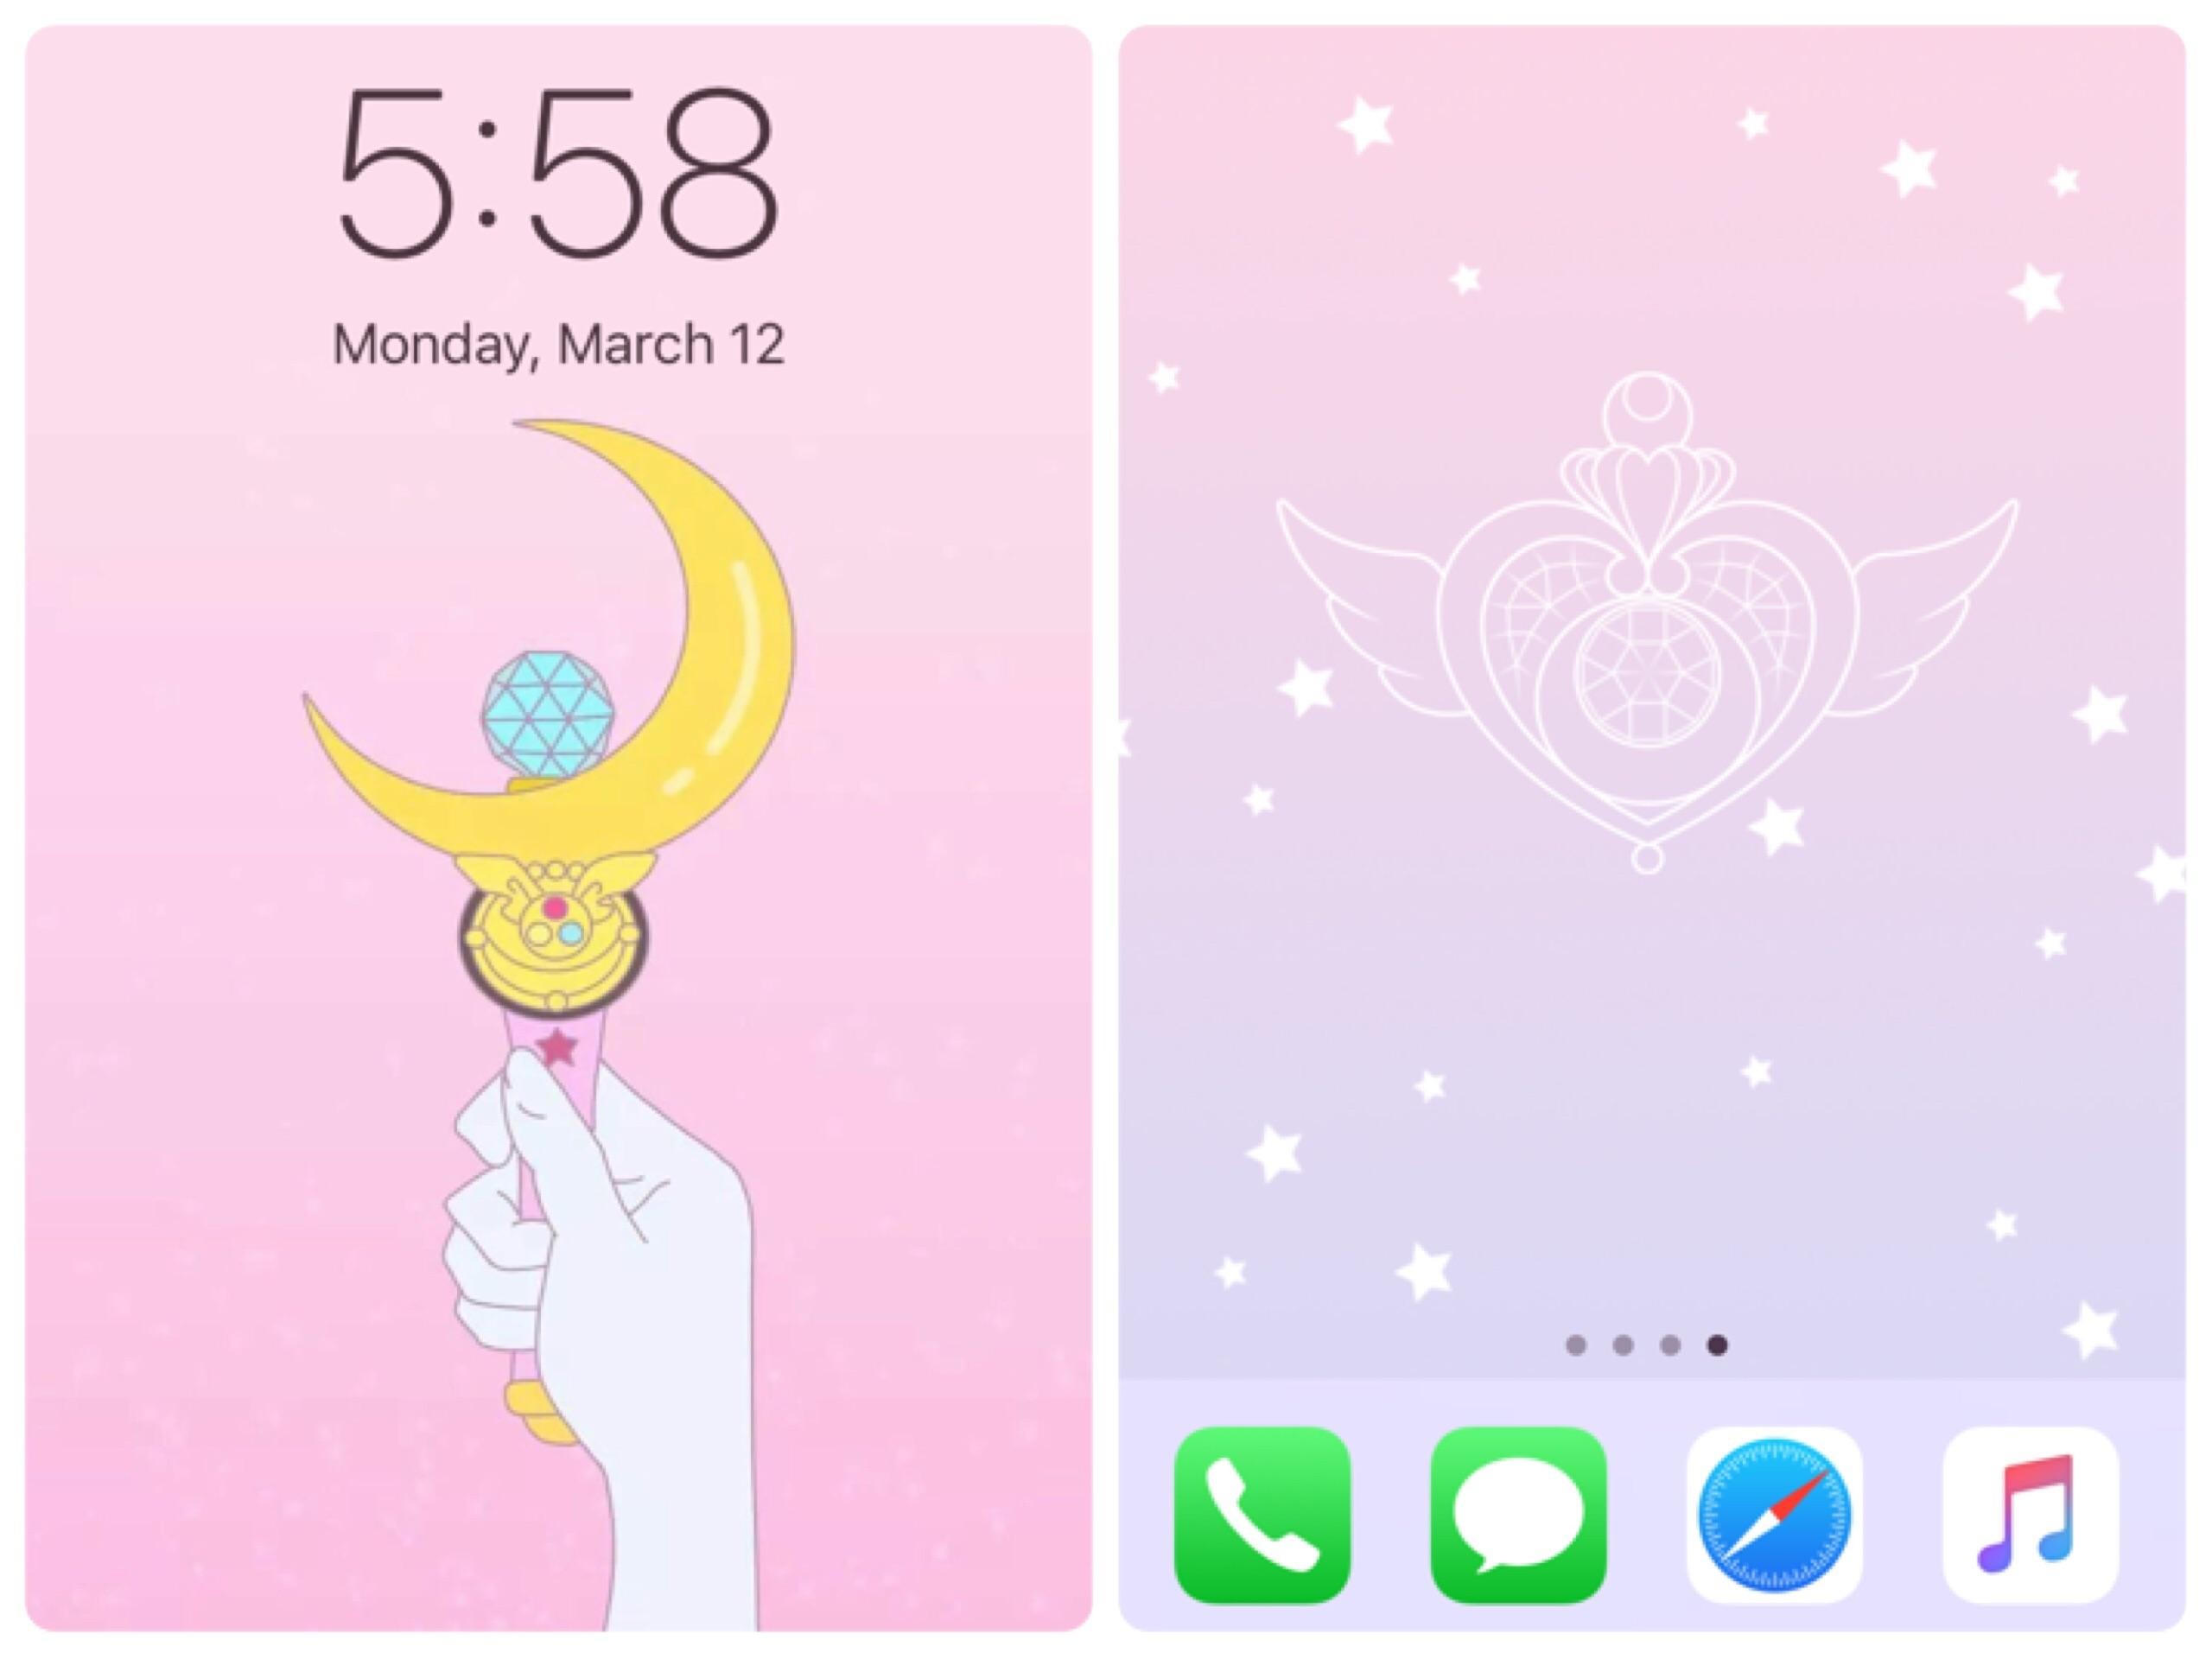 2560x1920 Fan WorkAnyone else have their phone background Sailor Moon themed? This is  what I currently have!